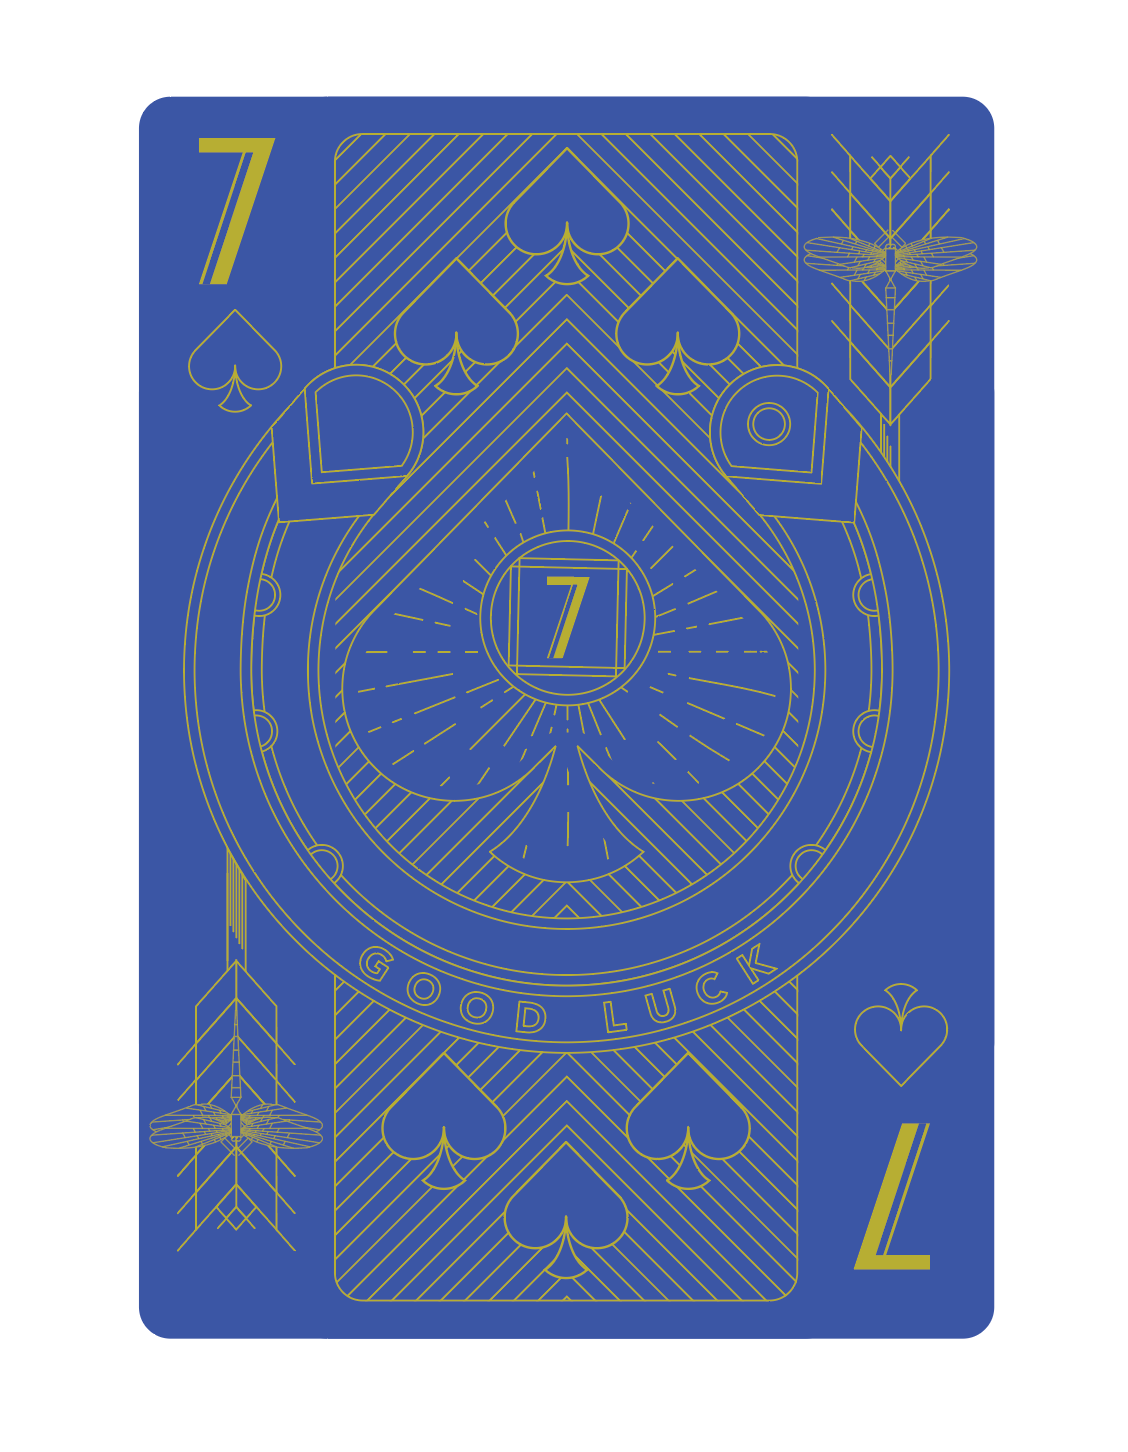 7 of Spades by Michael Kriegshauser on Dribbble